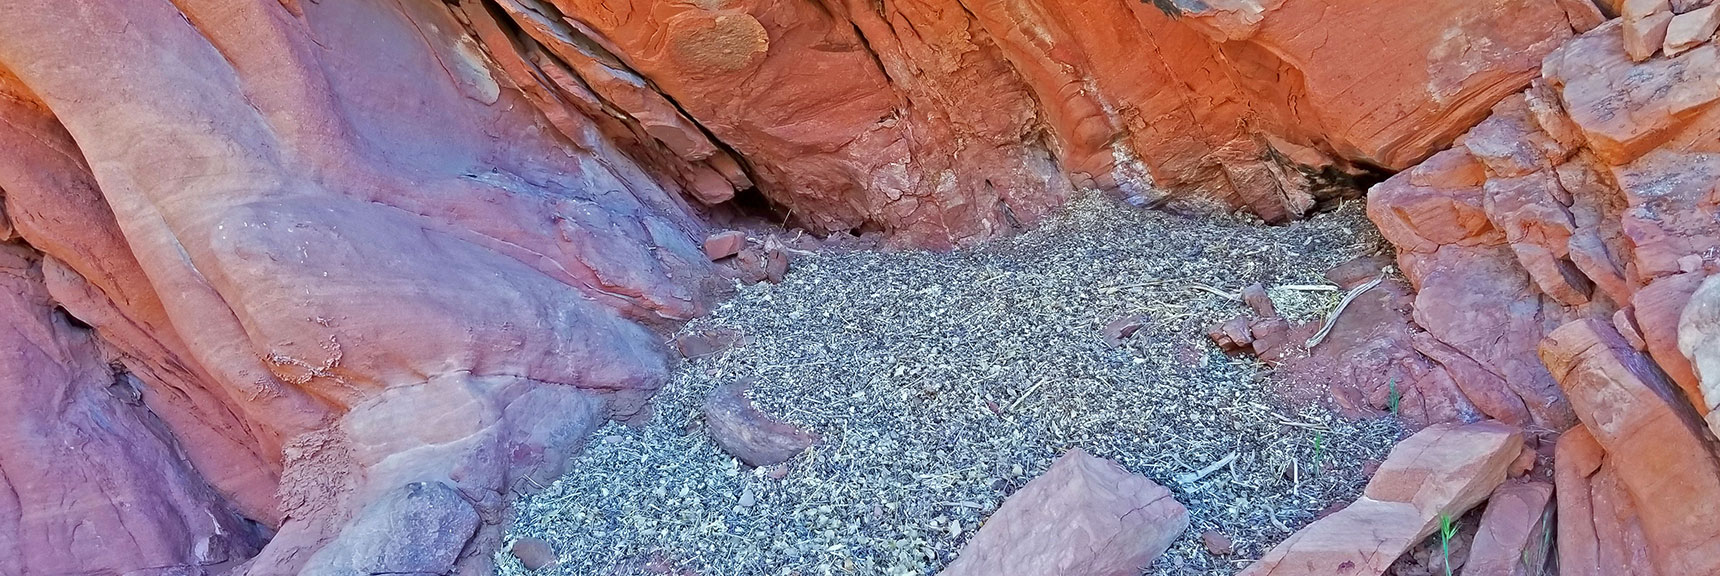 Another Small Animal Hole in Rocks Marked by Vegetative Matter at Opening | Little Red Rock Las Vegas, Nevada, Near La Madre Mountains Wilderness